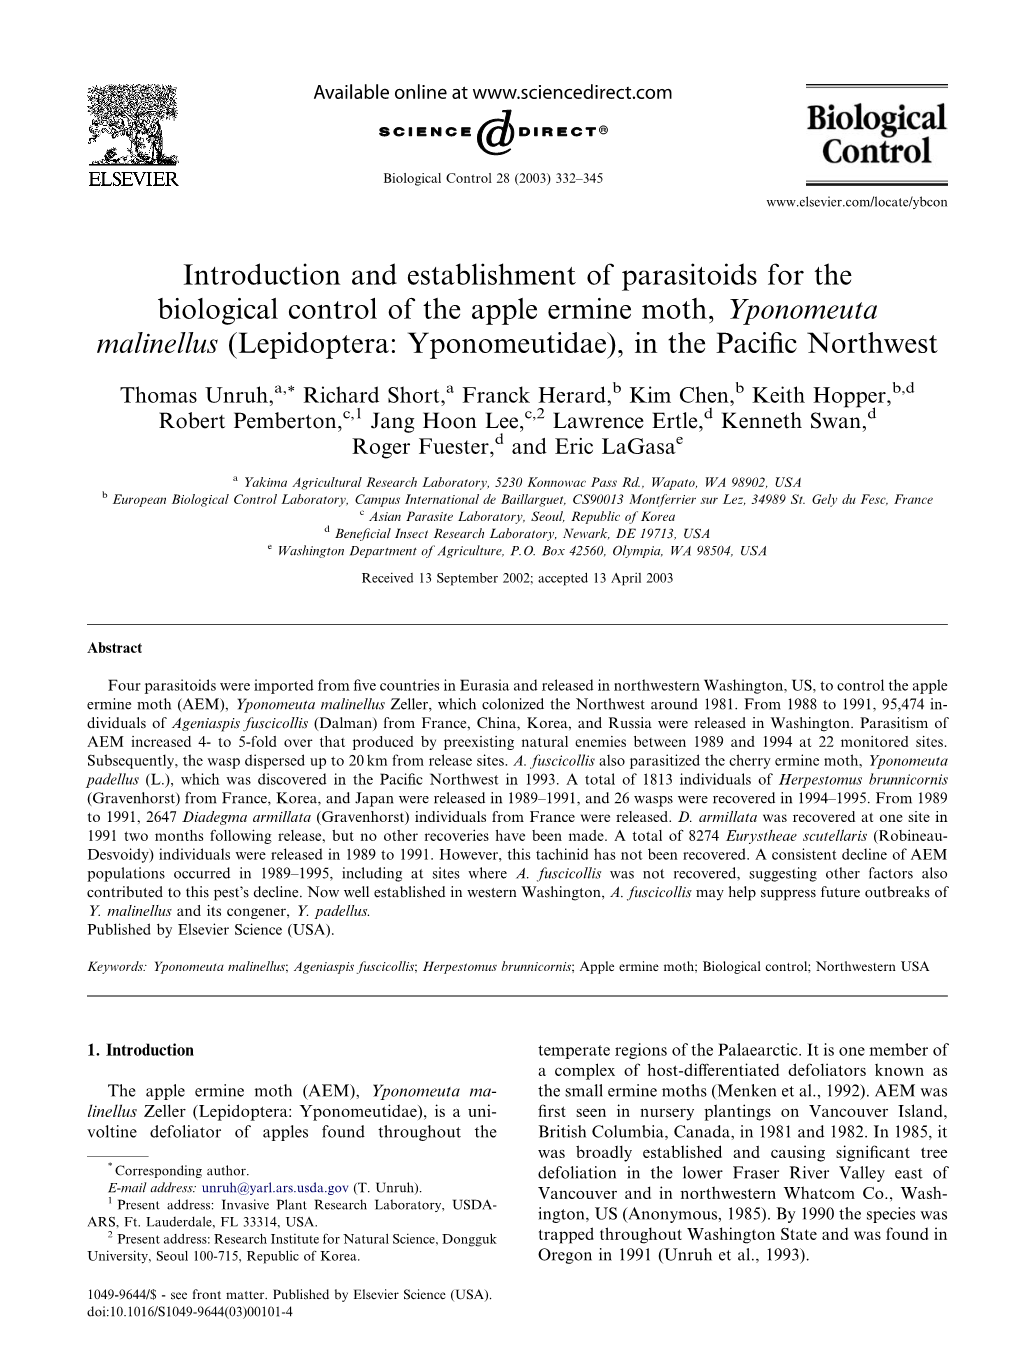 Introduction and Establishment of Parasitoids for The